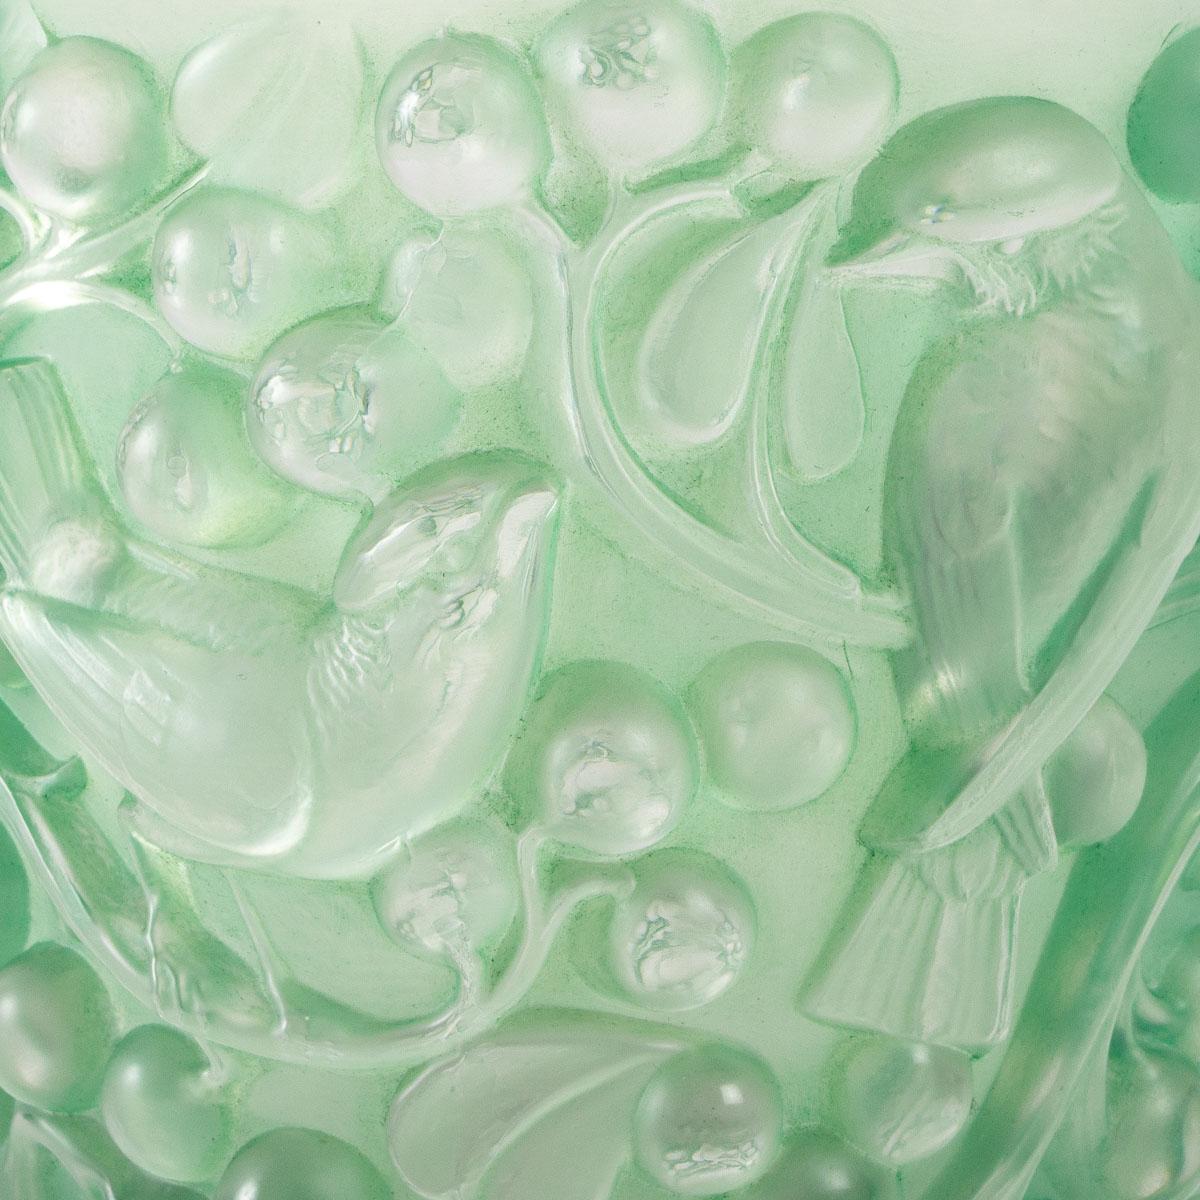 Molded 1927 René Lalique Avallon Vase in Frosted Glass with Green Patina Sparrows Birds